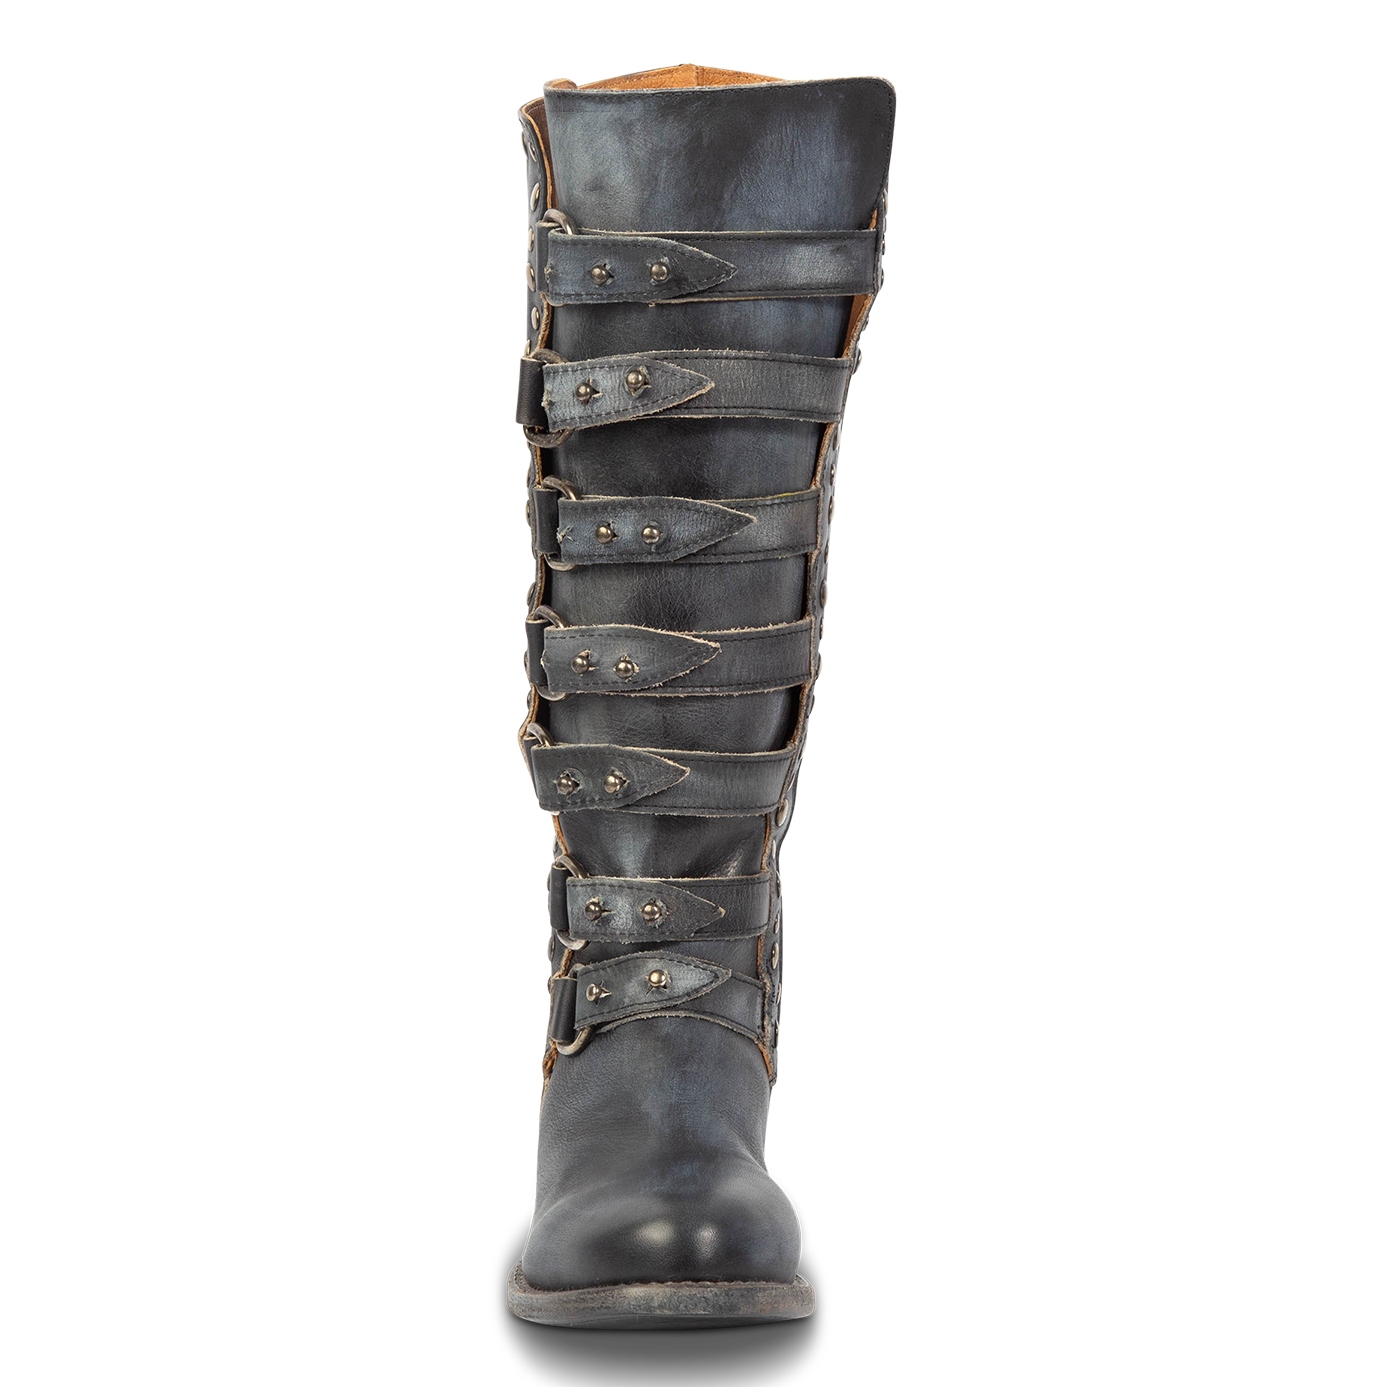 Front view showing FREEBIRD women's Rory navy leather boot with leather straps stacking up the front shaft and round toe